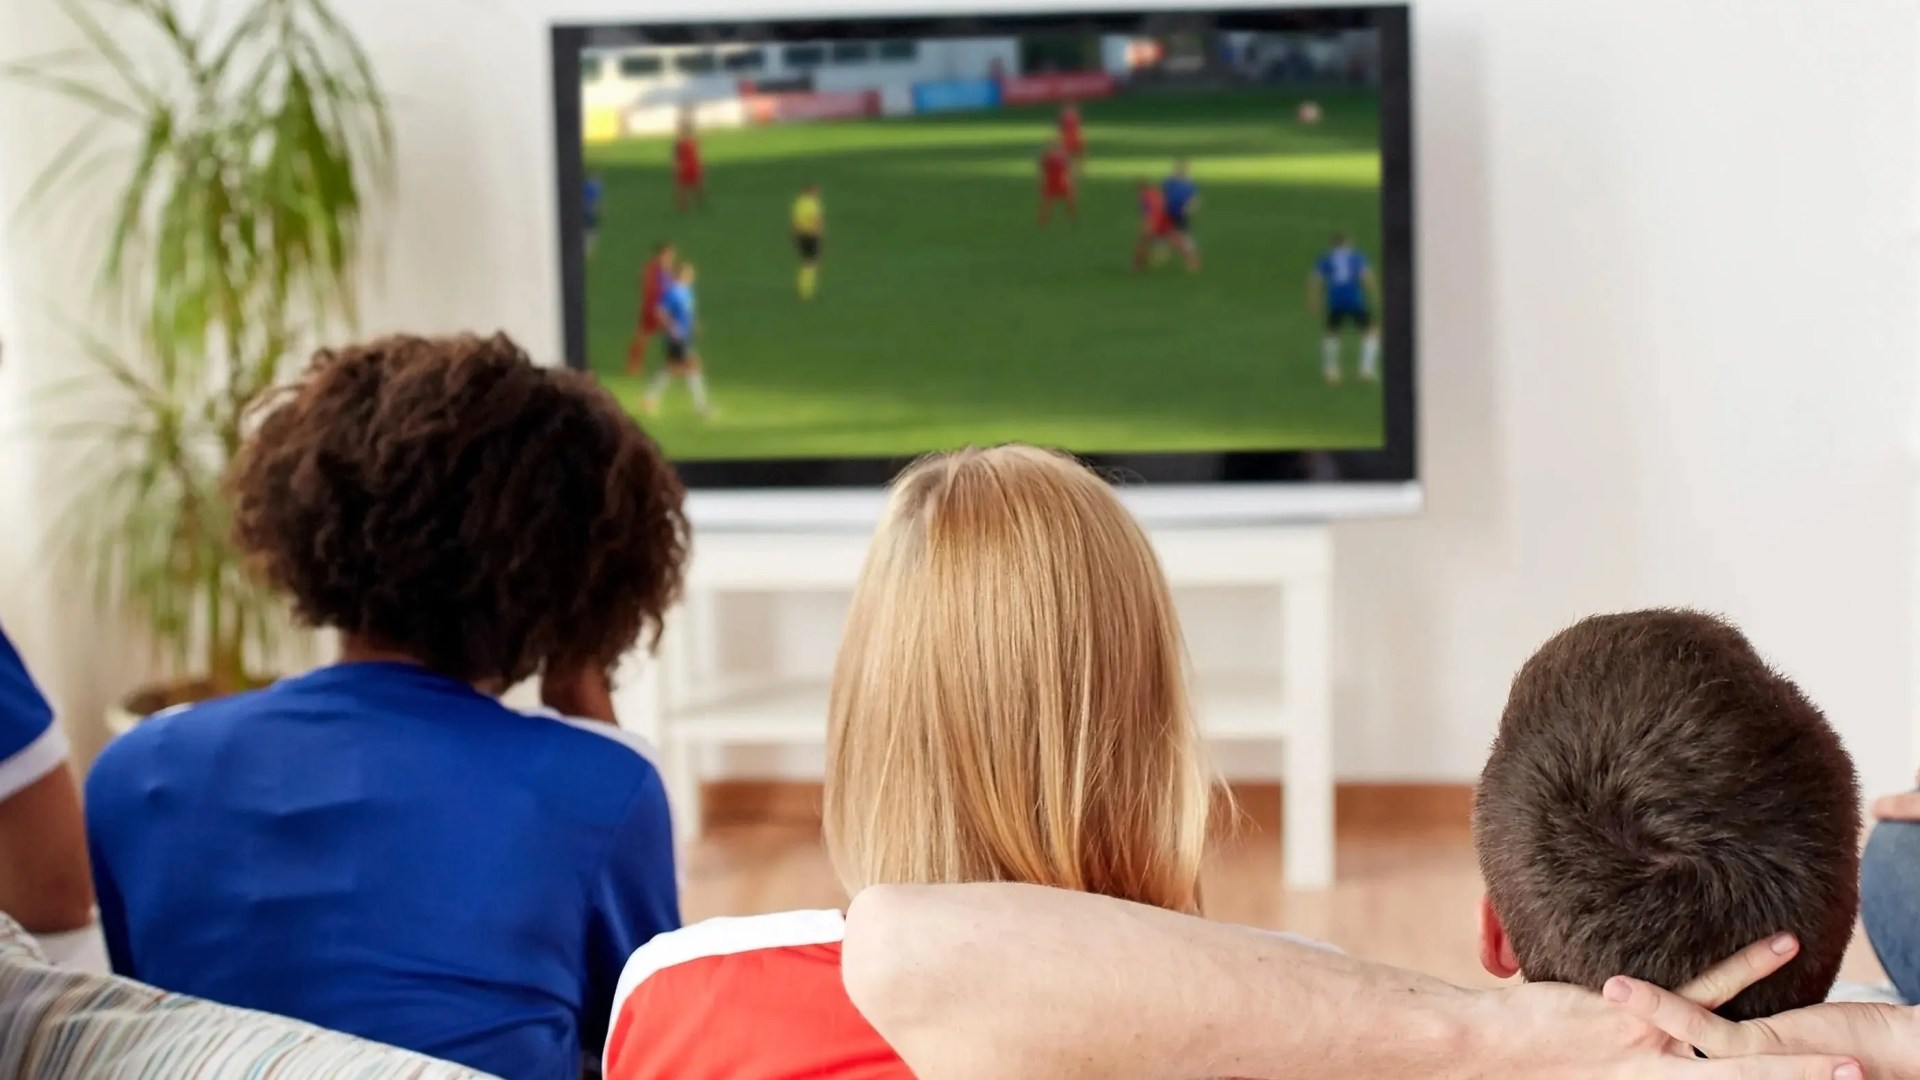 Watching sport makes you happier thanks to feel-good hormones, say scientists [Video]